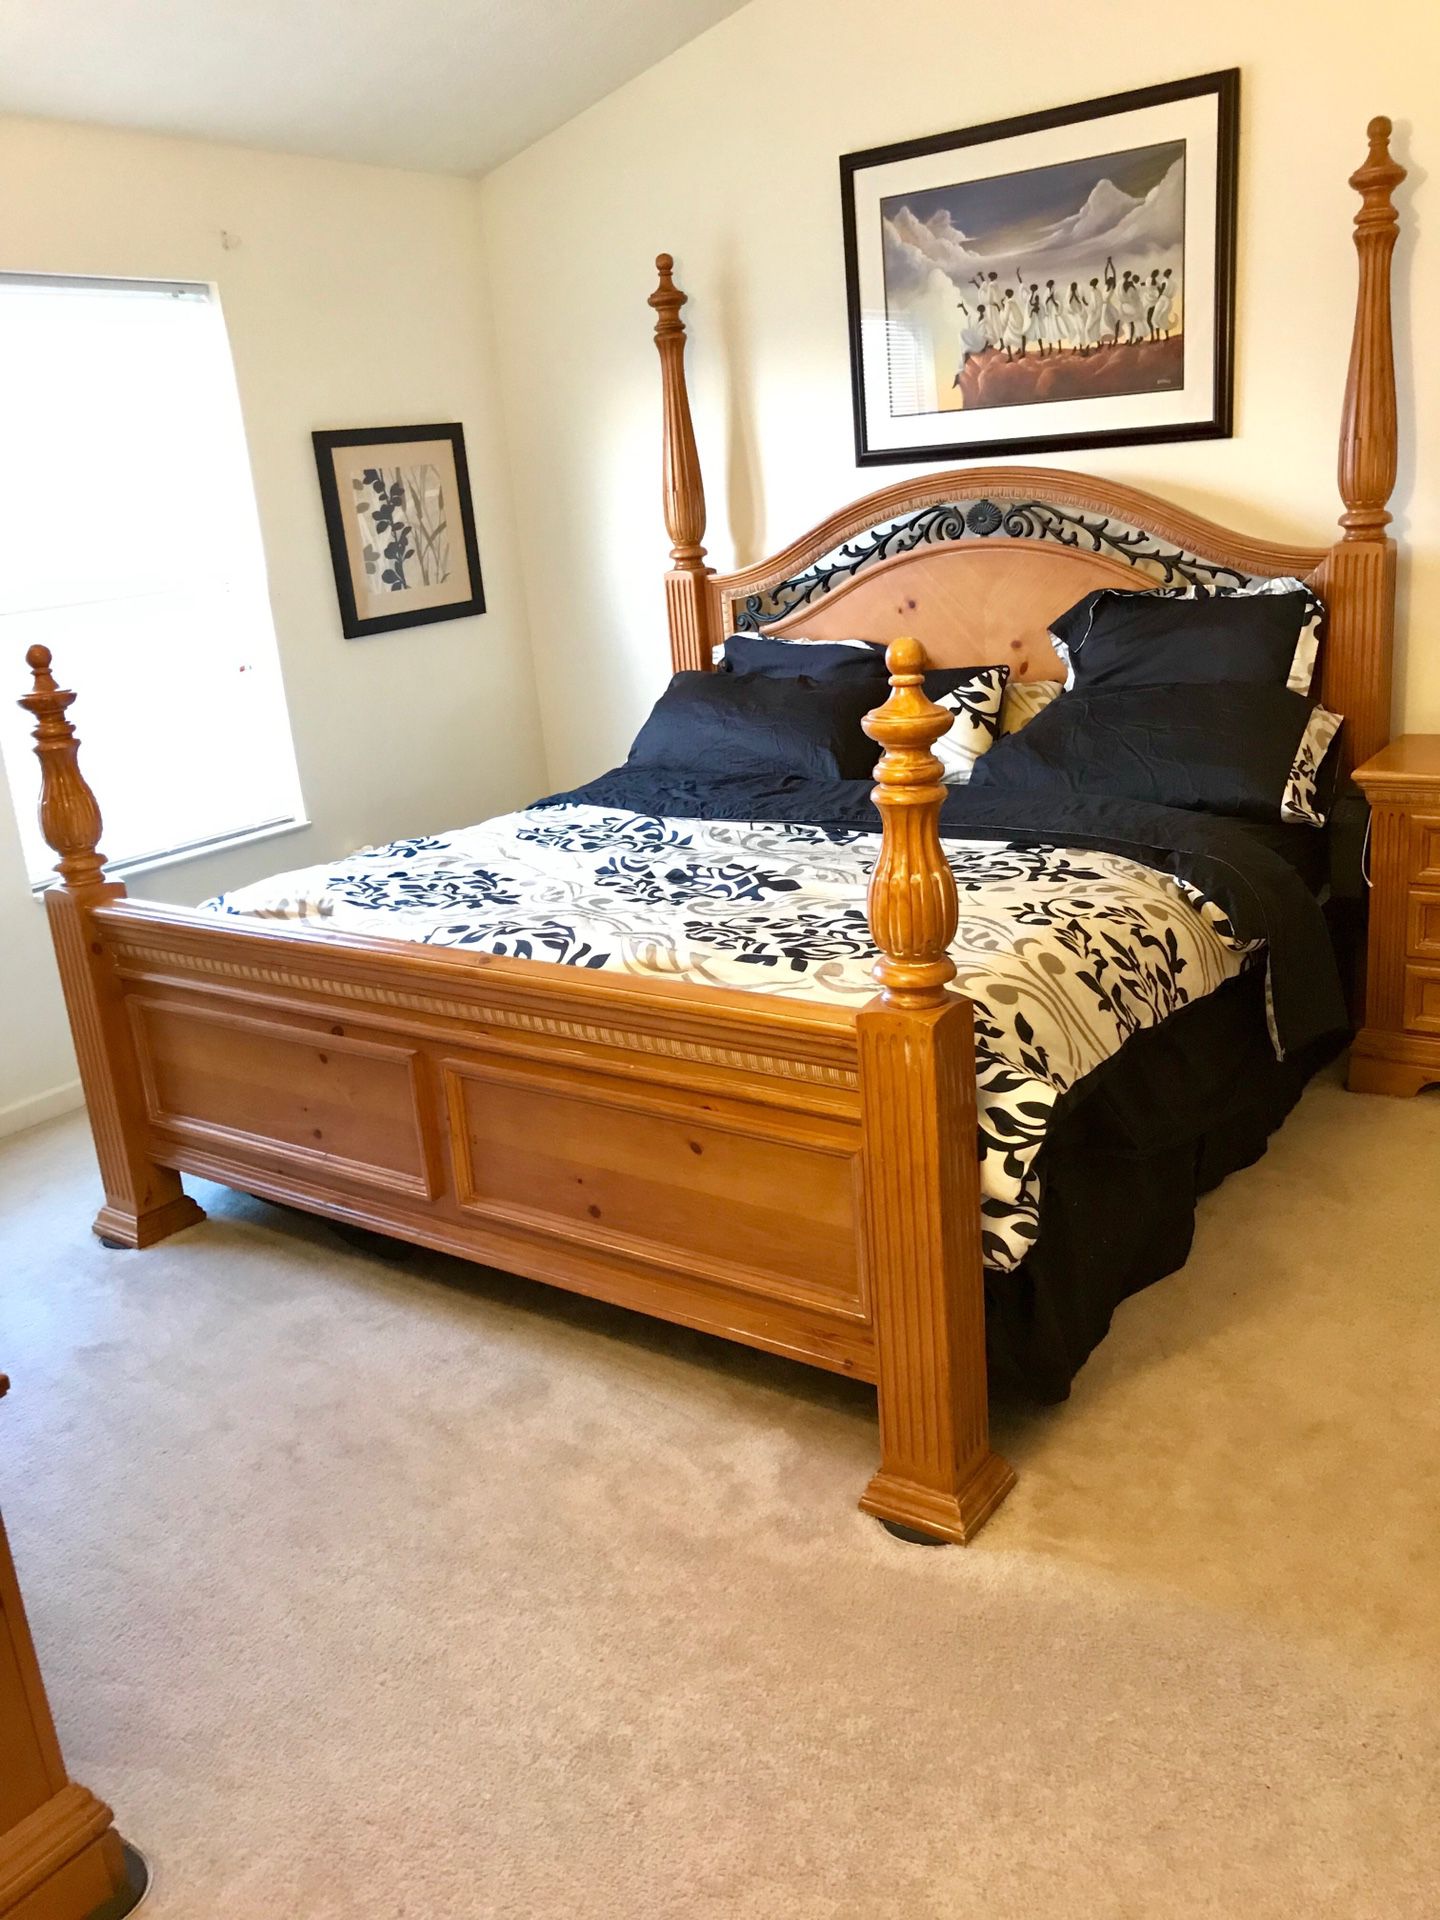 King Bedroom set. Set includes King Poster bed, firm mattress/box spring, 1 Night Stand, Dresser/Mirror, Armoire.